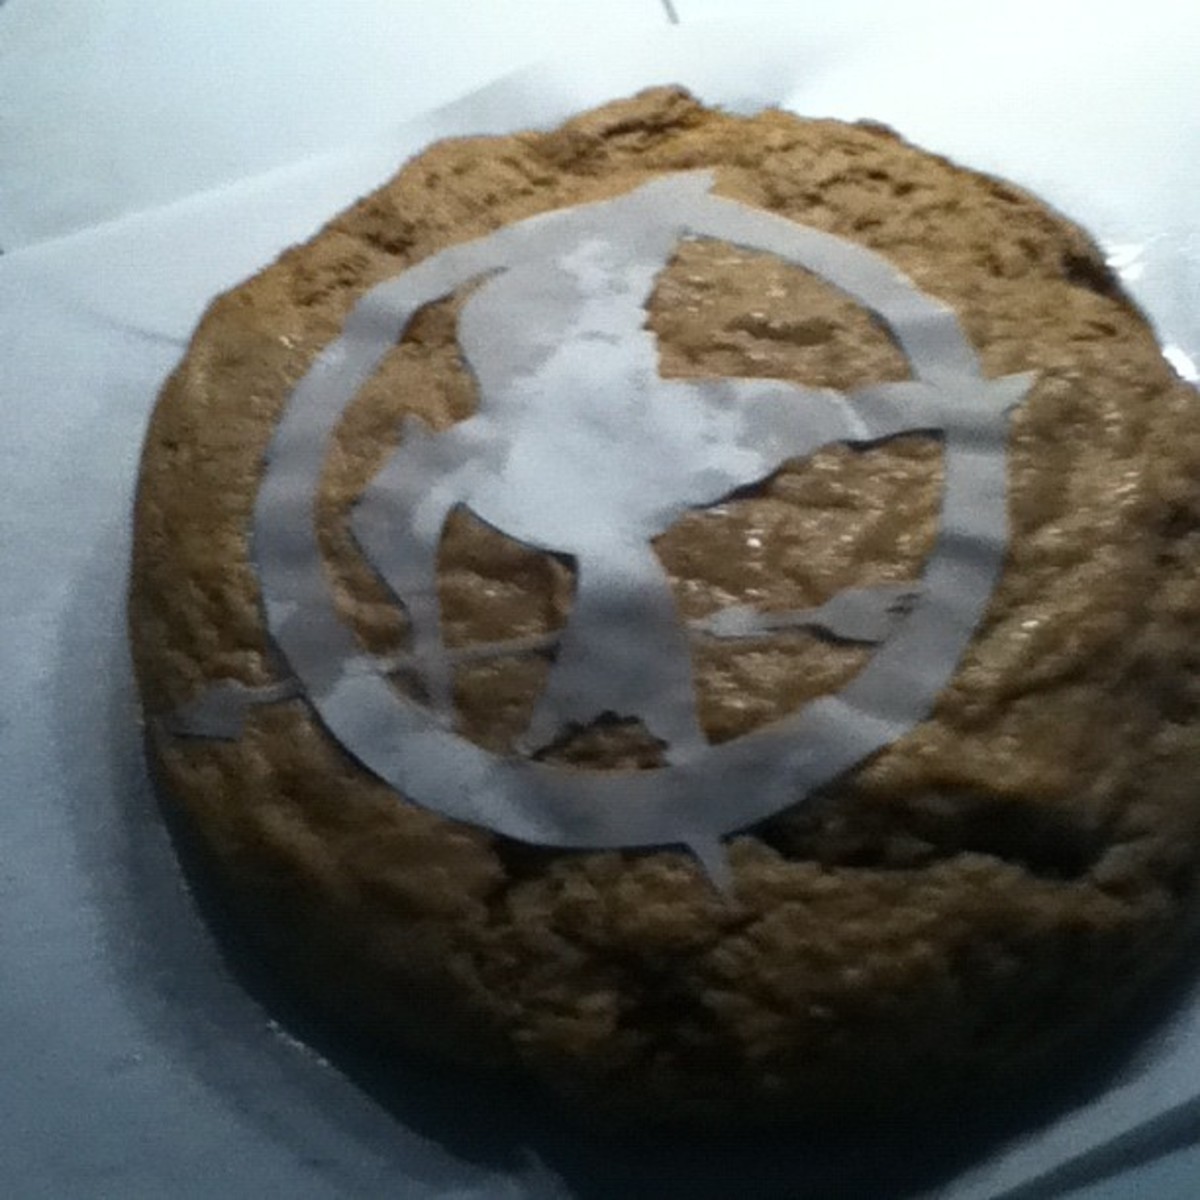 hunger games stenciled bread